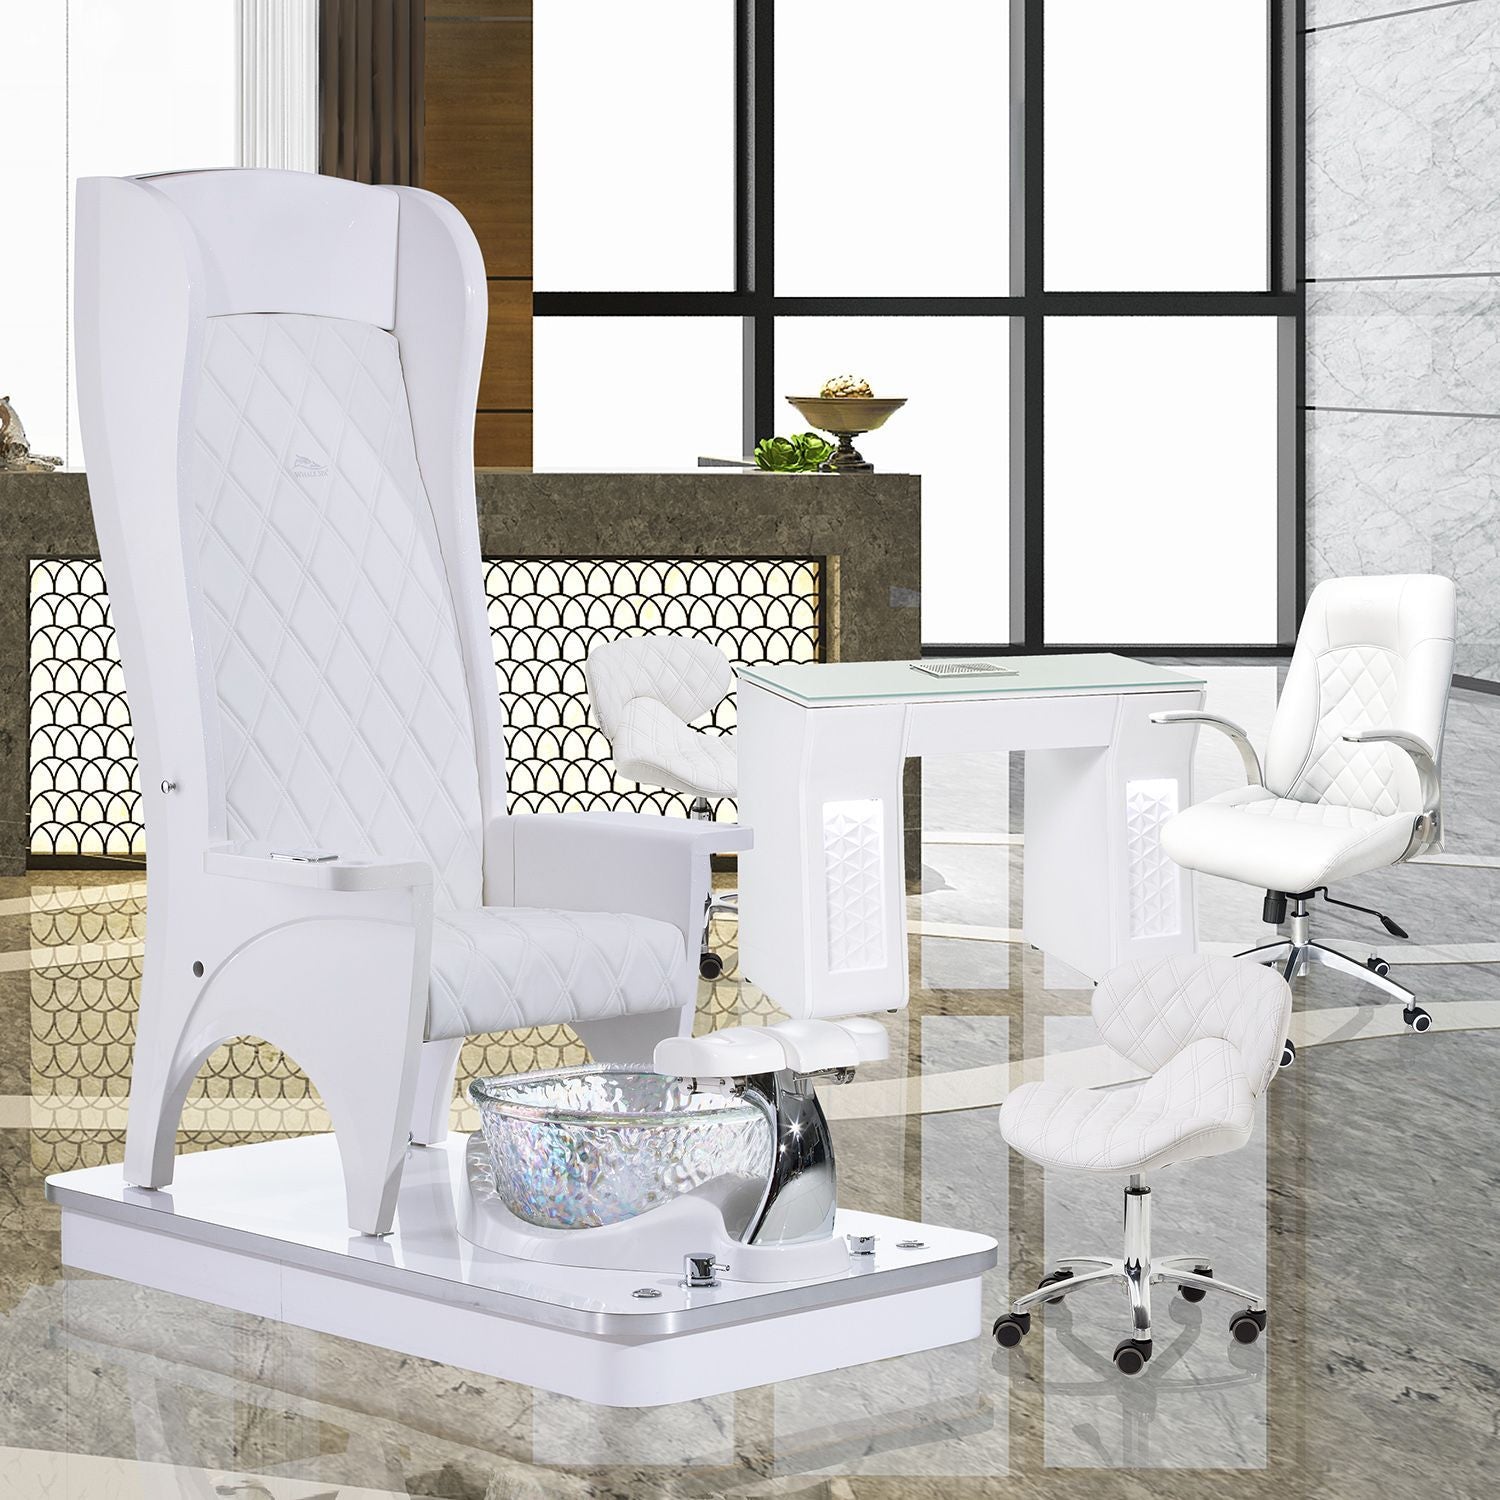 Whale Spa Monarch Pedicure Chair in white with white vicki table, white customer chair for nail salon. Package set offers a discount and a stool.